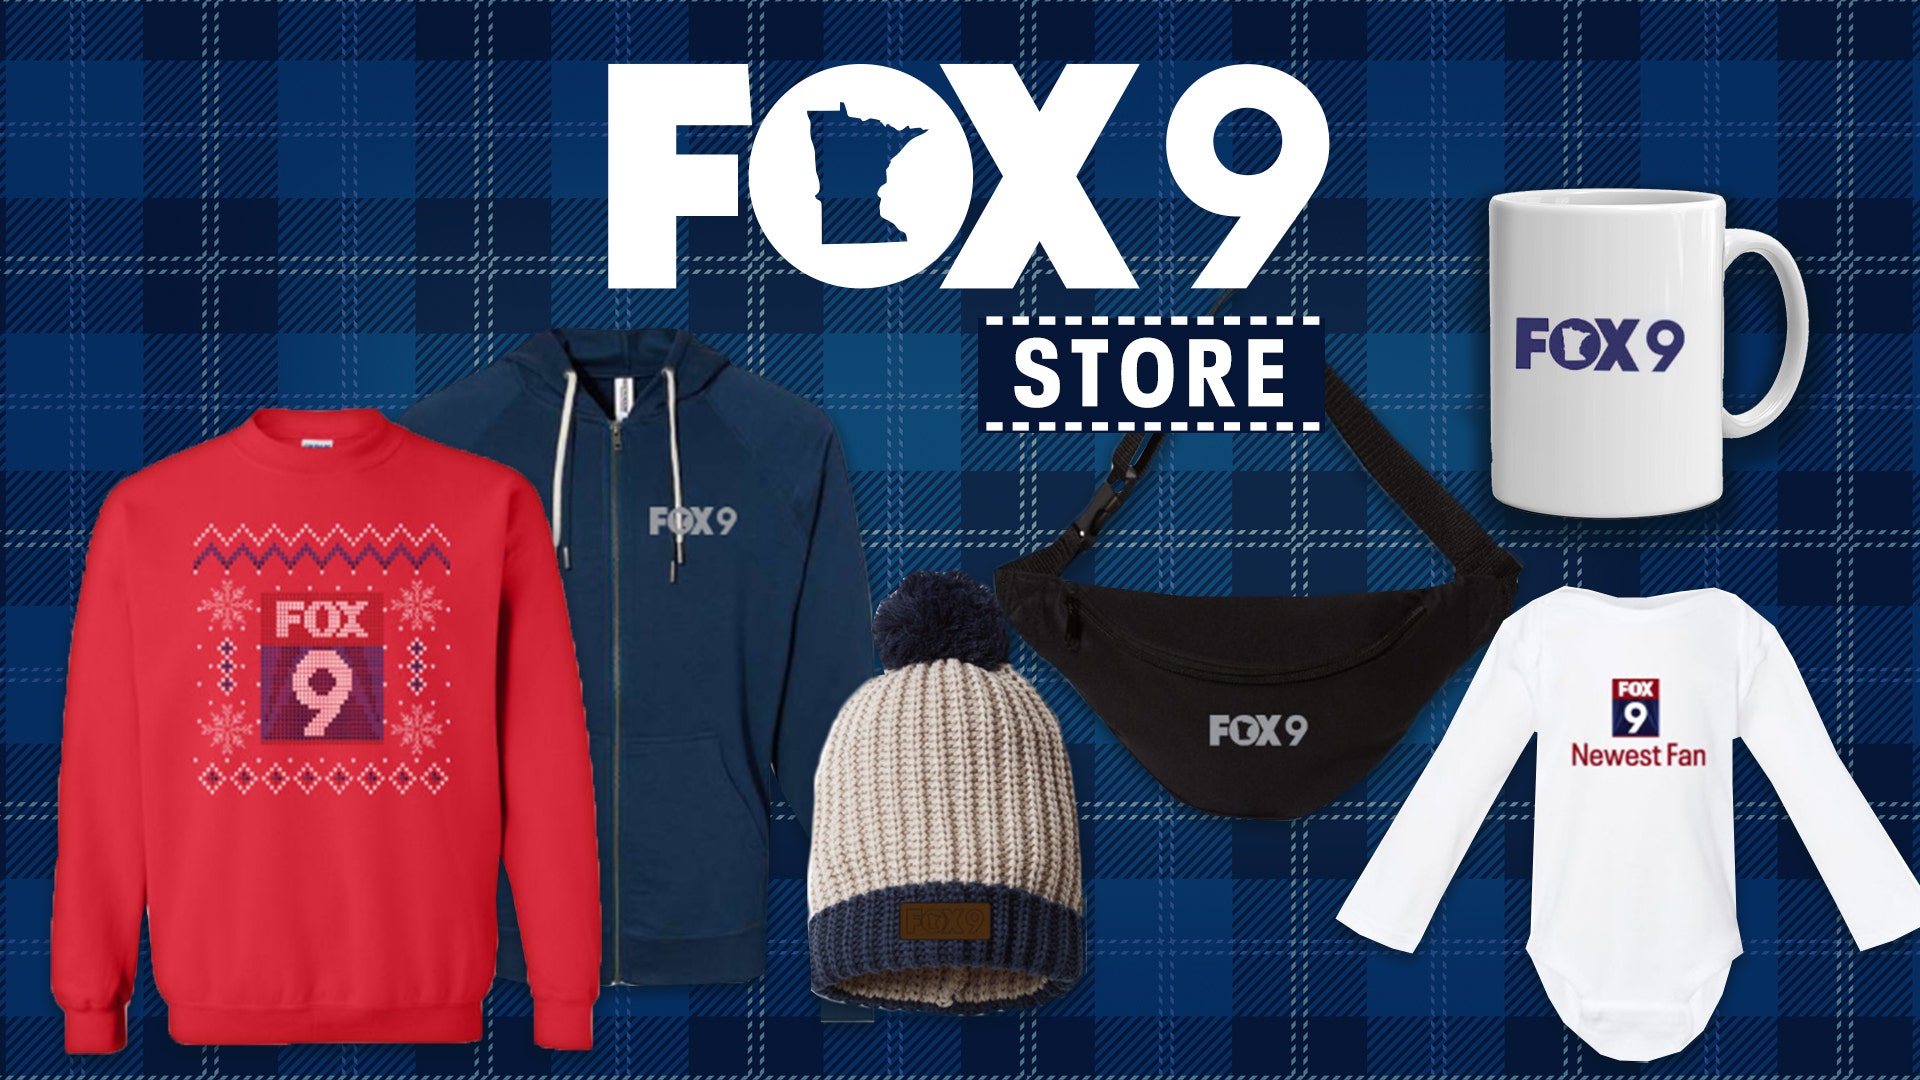 Shop at the FOX 9 Store